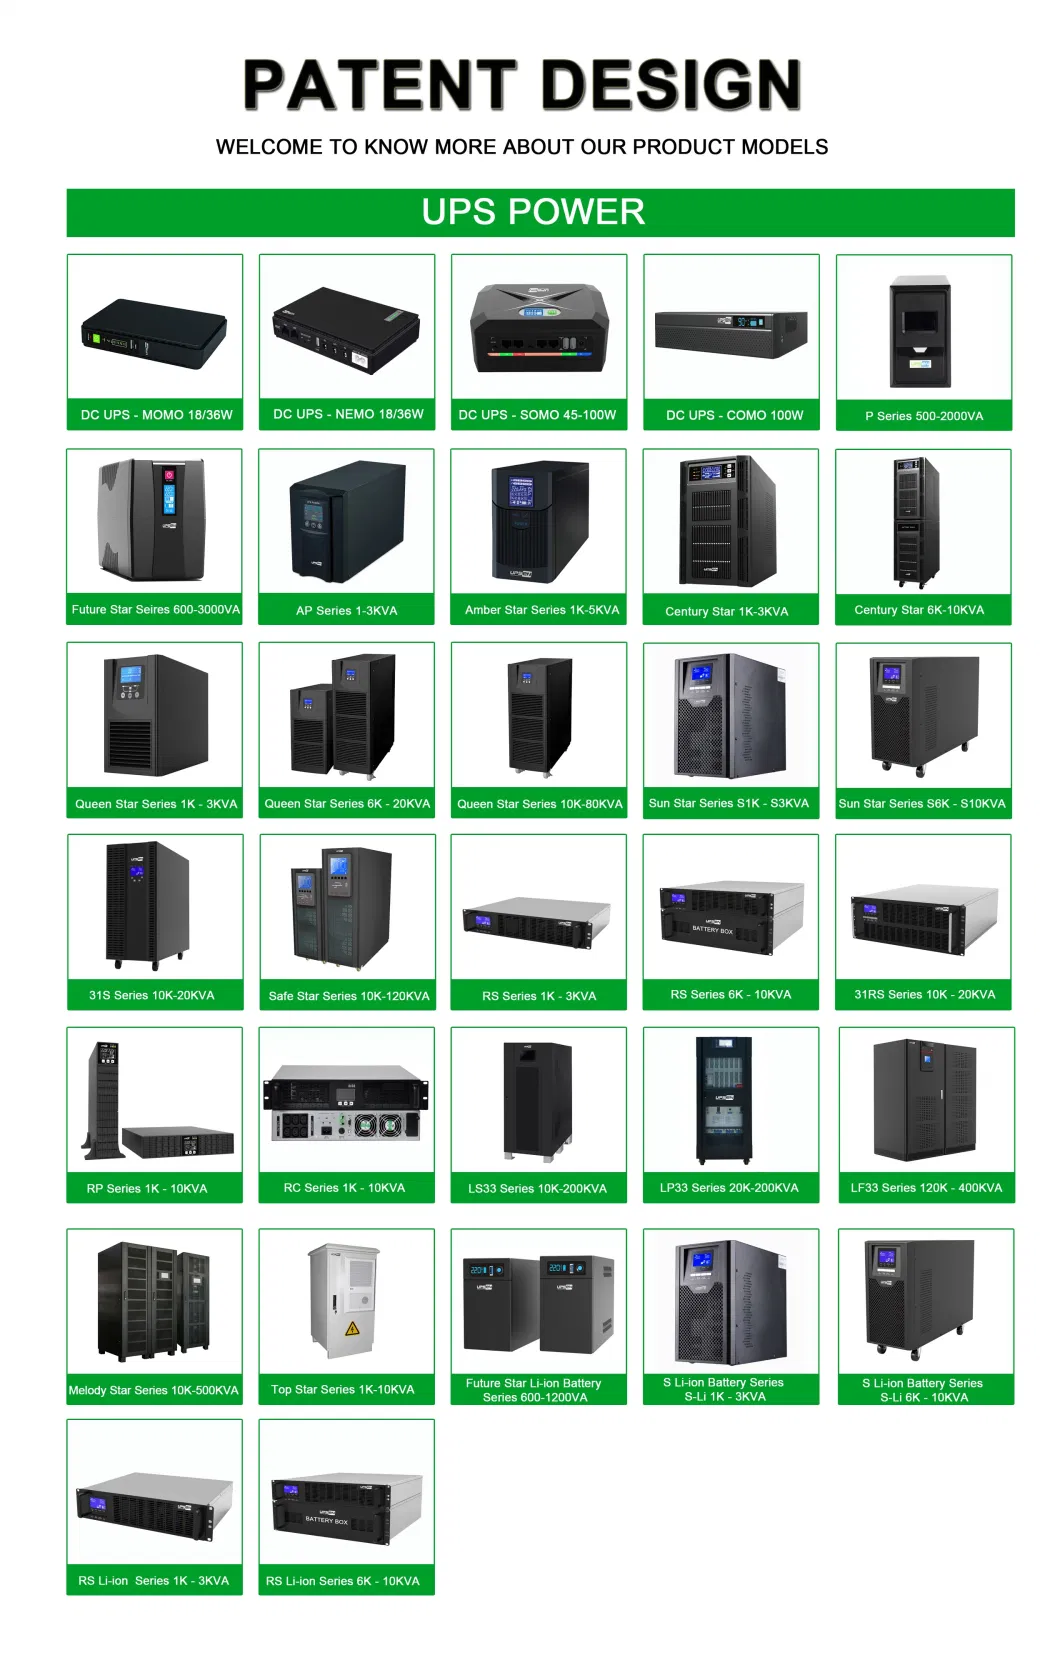 Rack Tower Converitable UPS Low Noise Level High Frequency Online UPS for Sensitive Electronic Equipment